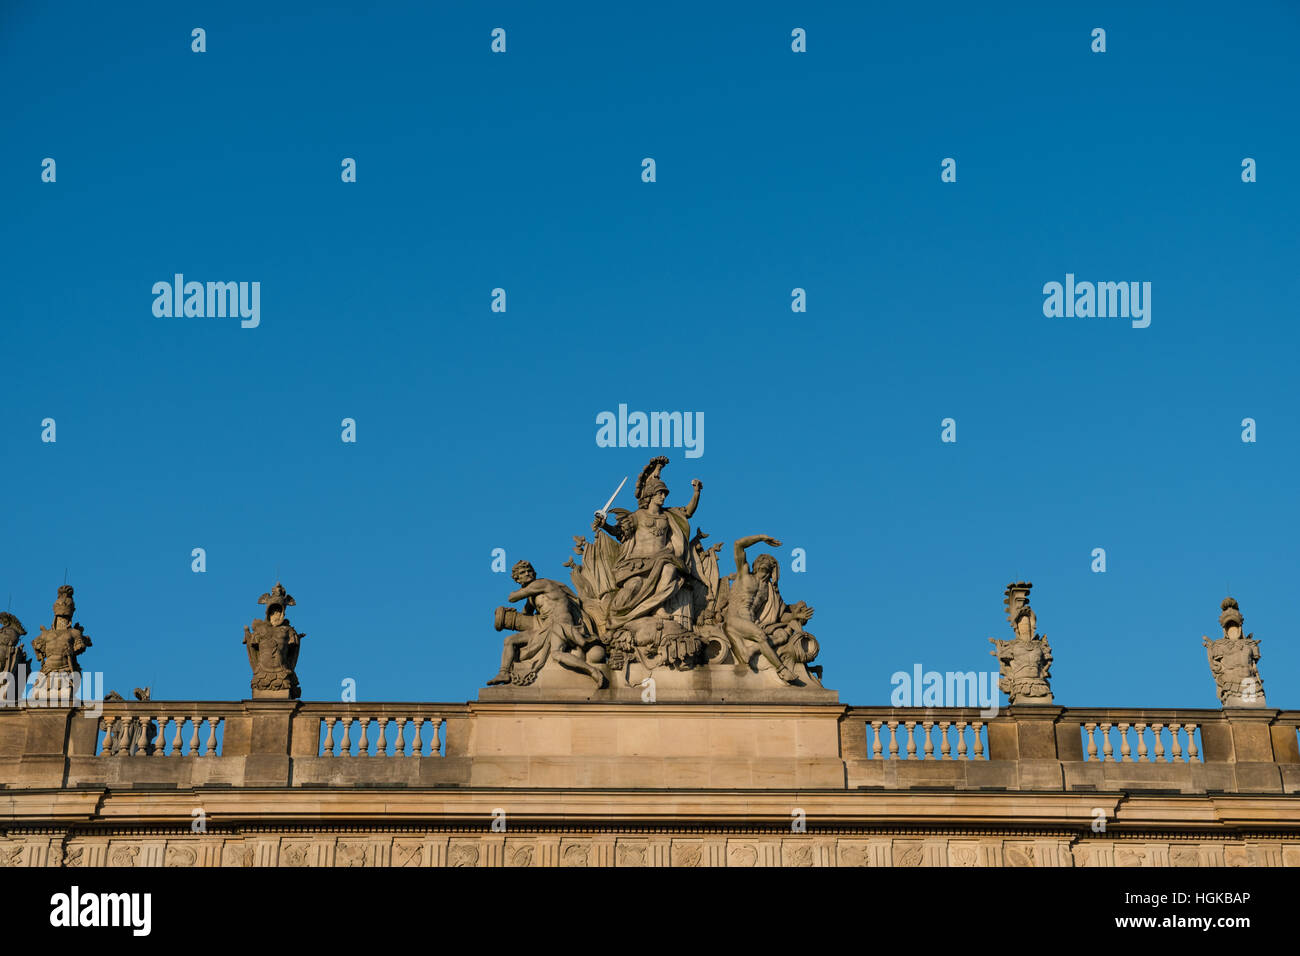 sculptures on historic building in, Berlin, Germany Stock Photo